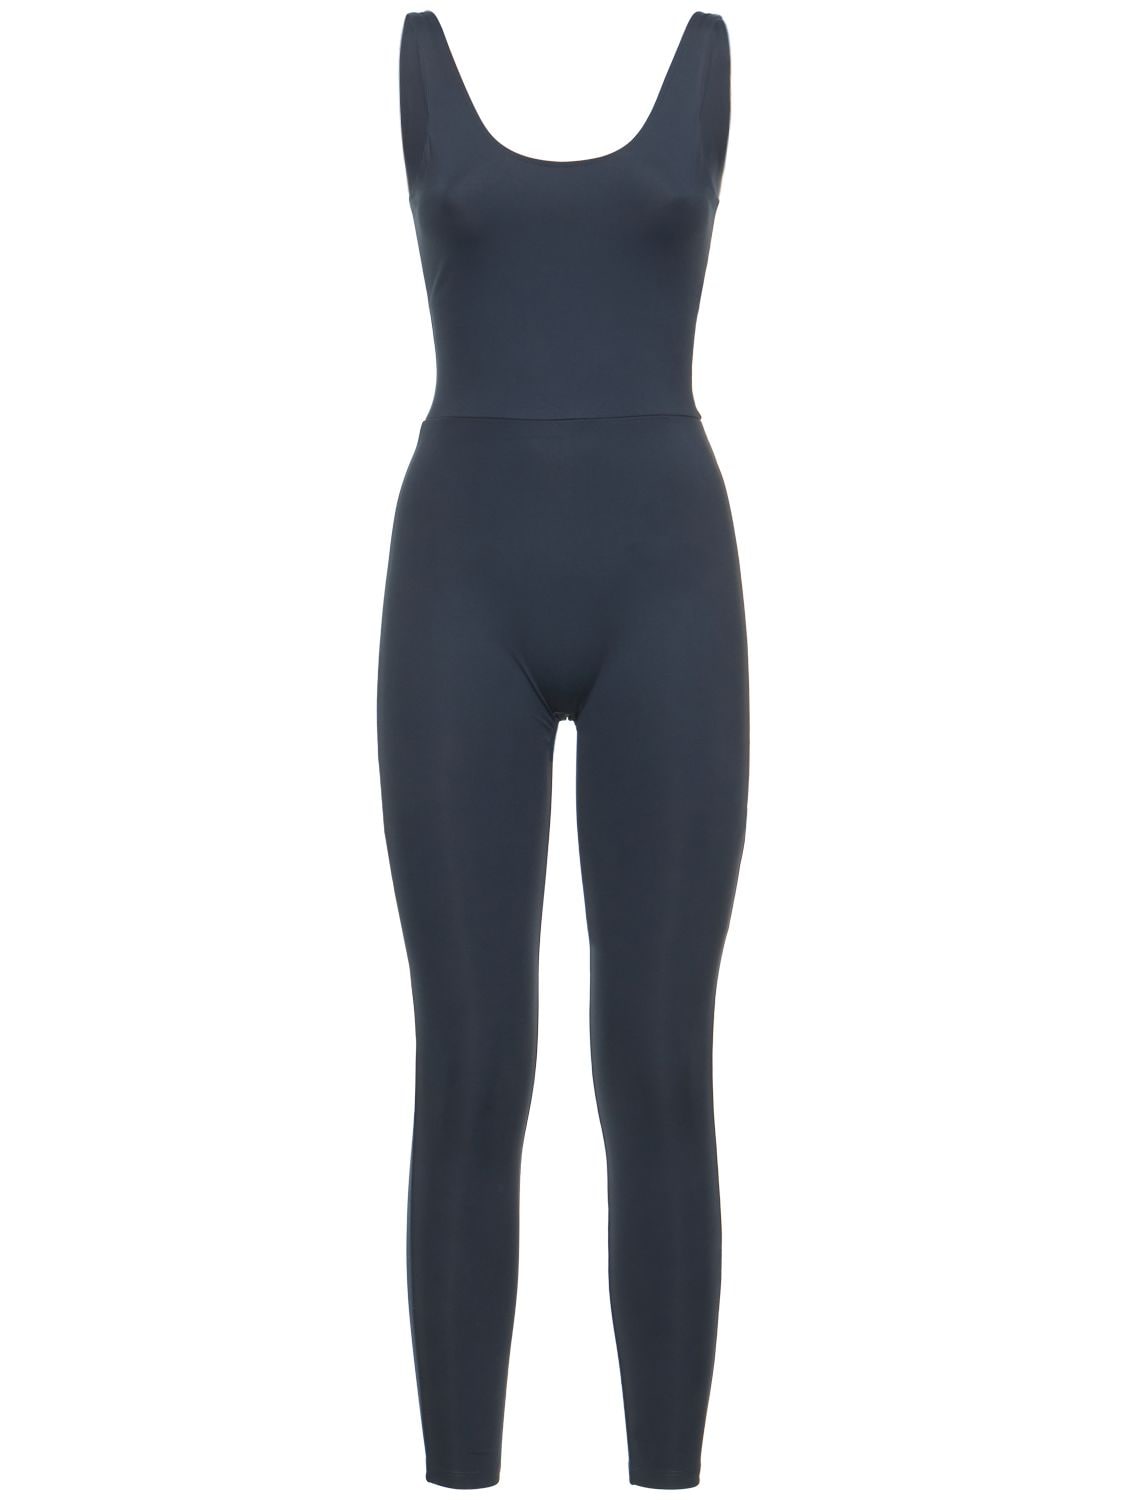 Girlfriend Collective The Scoop Back Seamless Unitard Jumpsuit In Navy